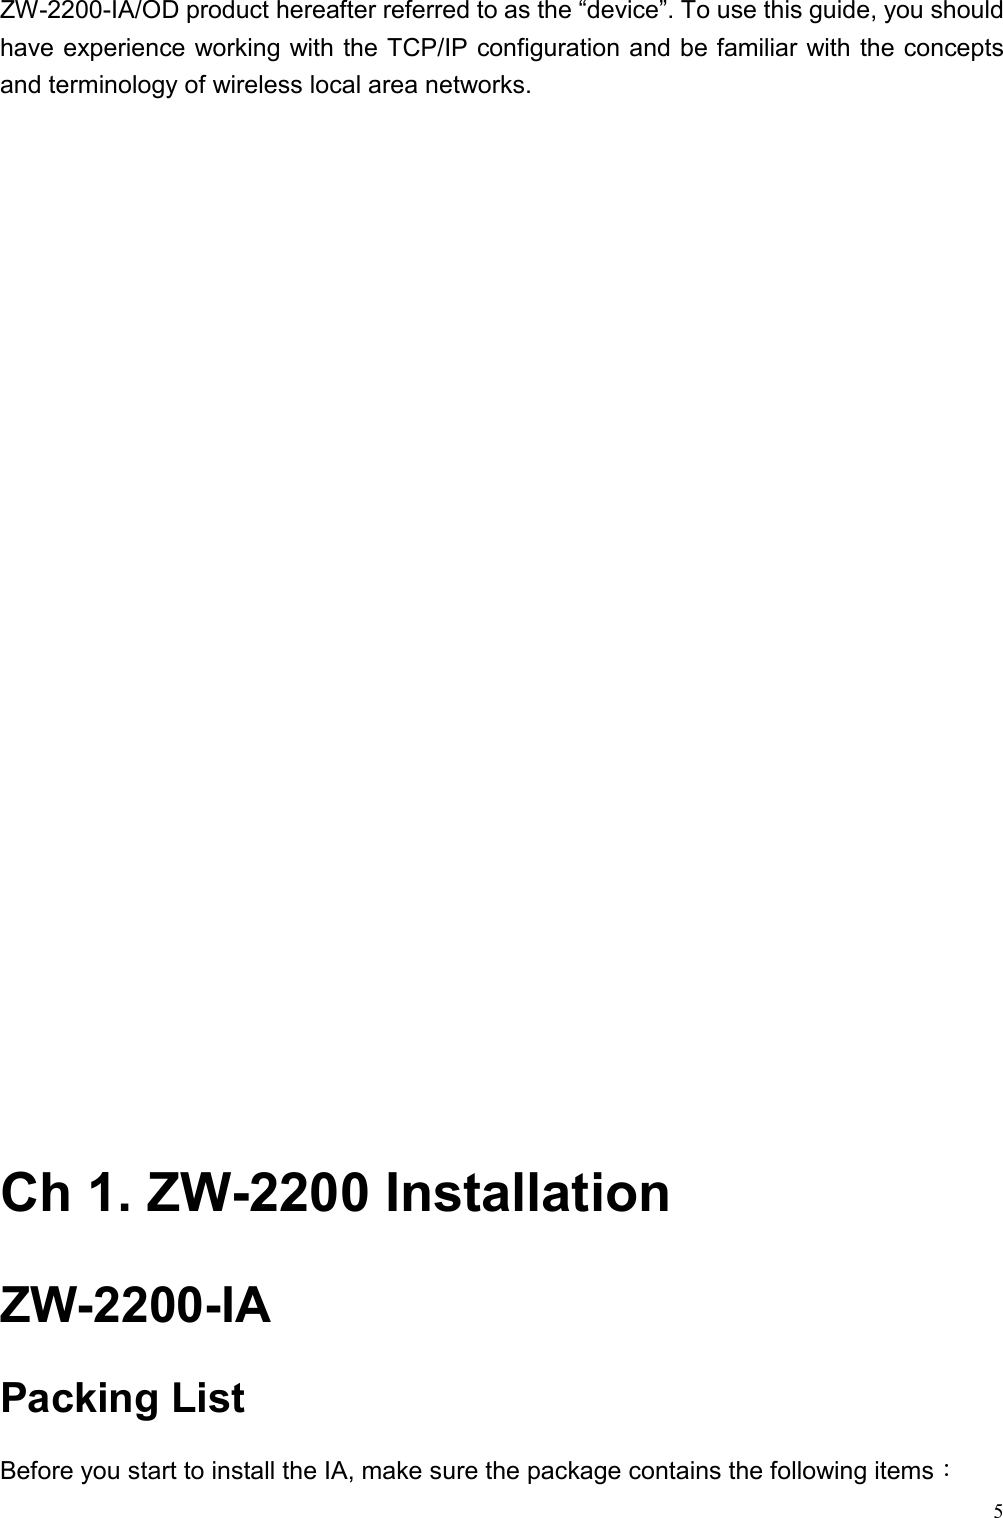   5ZW-2200-IA/OD product hereafter referred to as the “device”. To use this guide, you should have experience working with the TCP/IP configuration and be familiar with the concepts and terminology of wireless local area networks.                             Ch 1. ZW-2200 Installation ZW-2200-IA Packing List Before you start to install the IA, make sure the package contains the following items： 